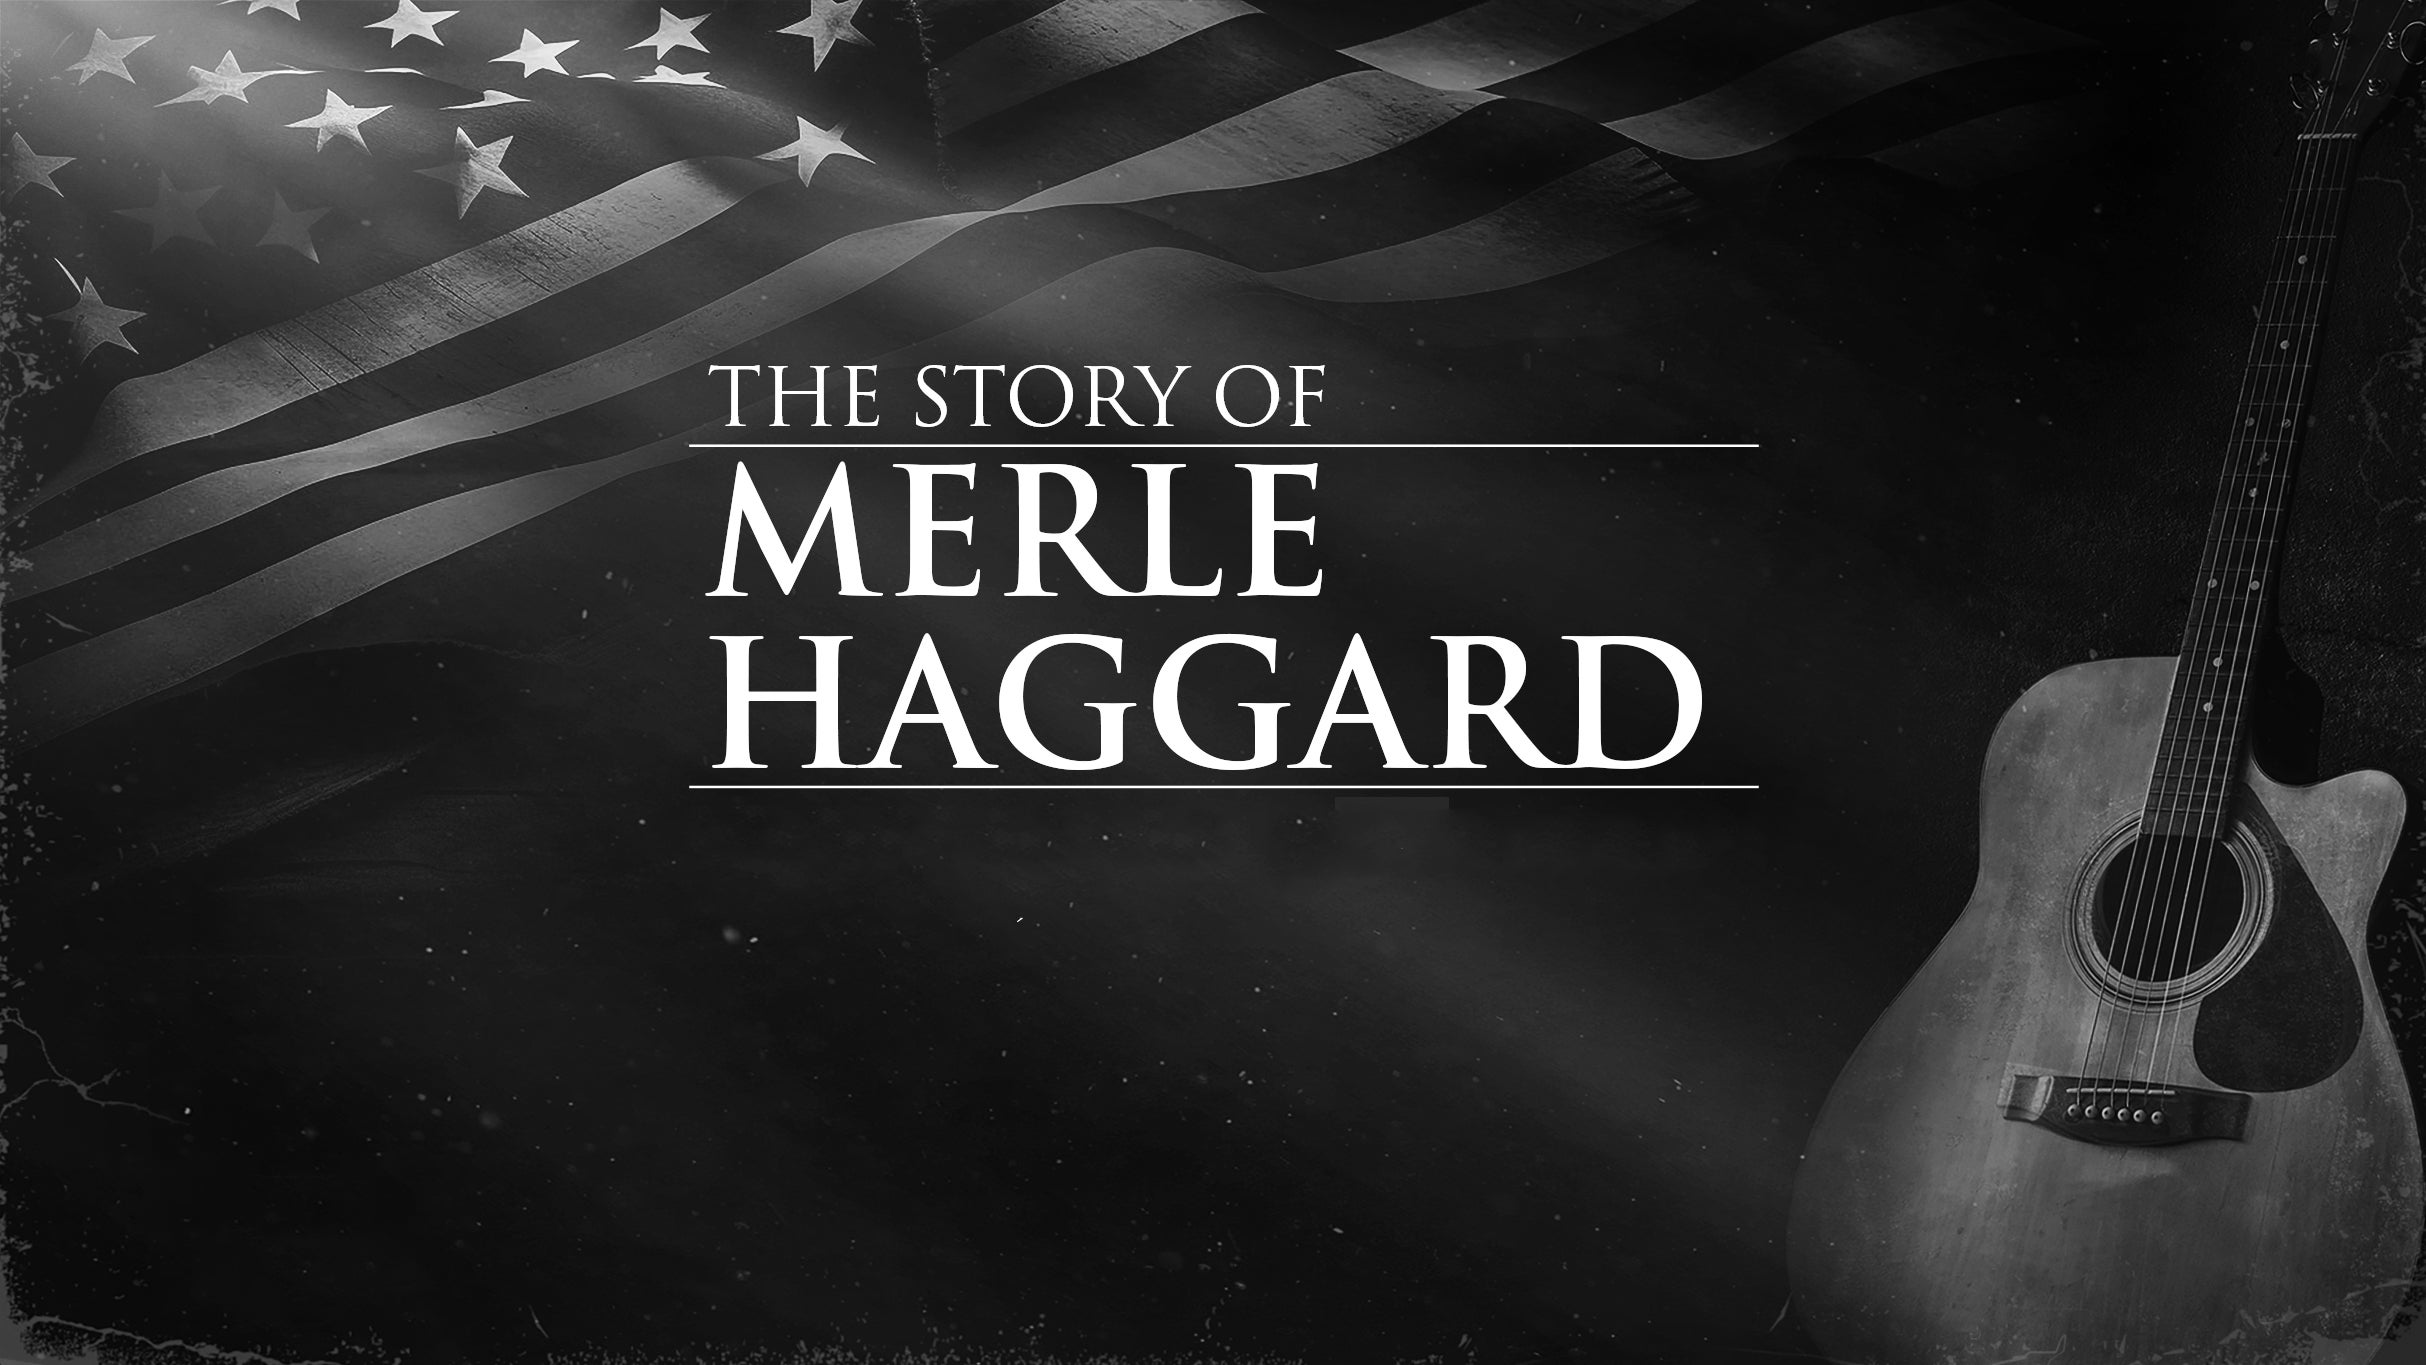 The Story of Merle Haggard